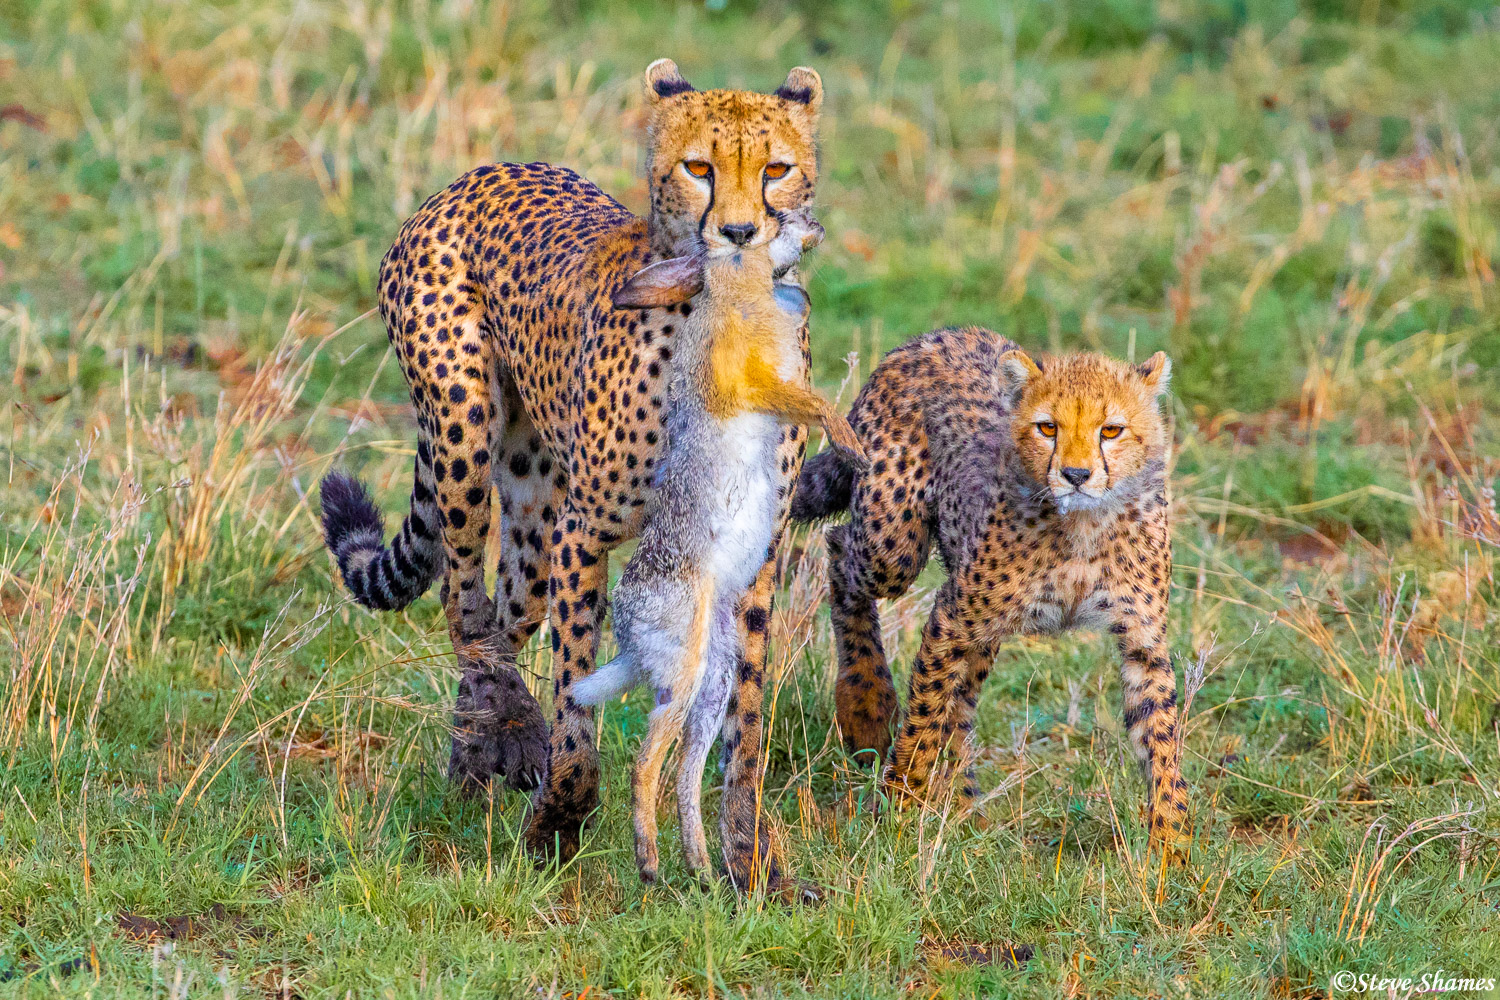 A proud mother cheetah carrying her rabbit kill. It was about a 5 second full speed zig zigging chase, but she got it!